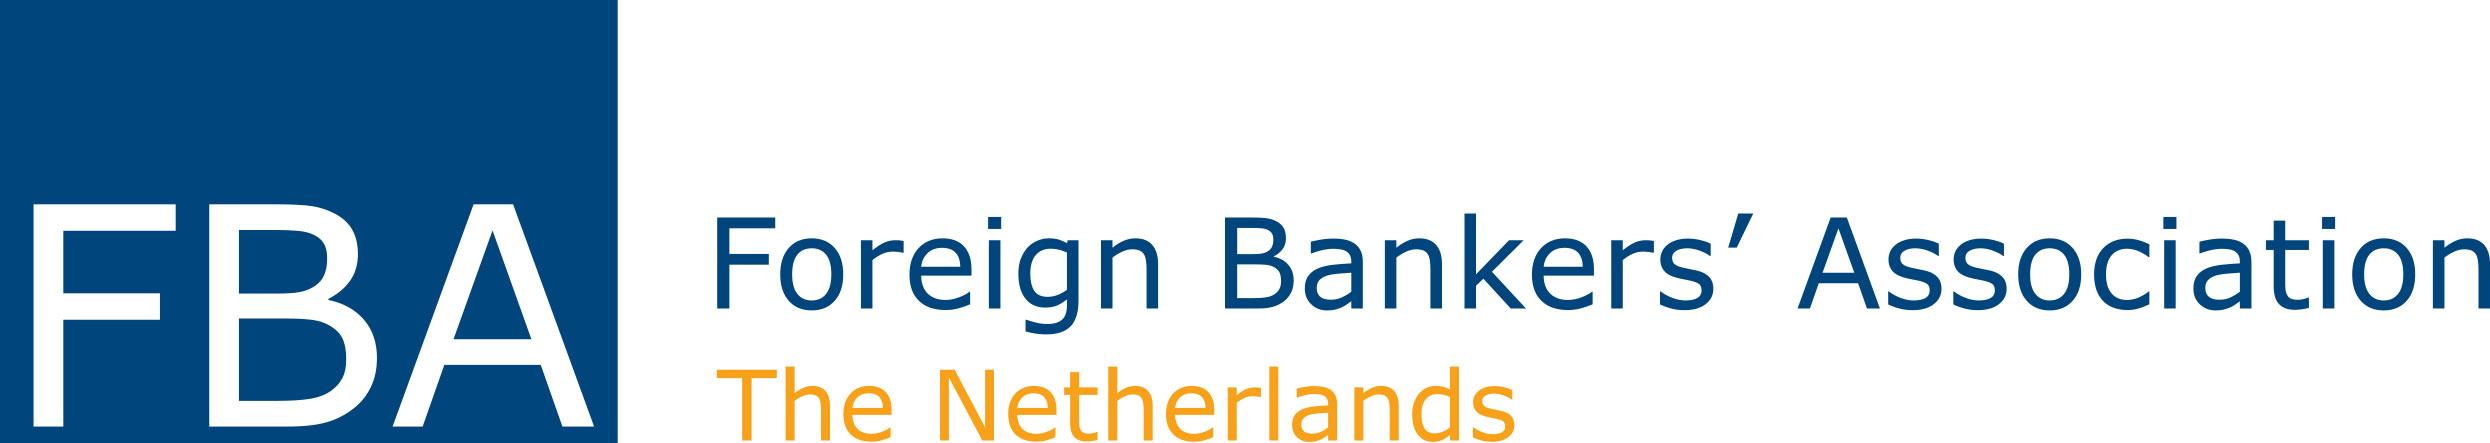 Foreign Bankers' Association logo